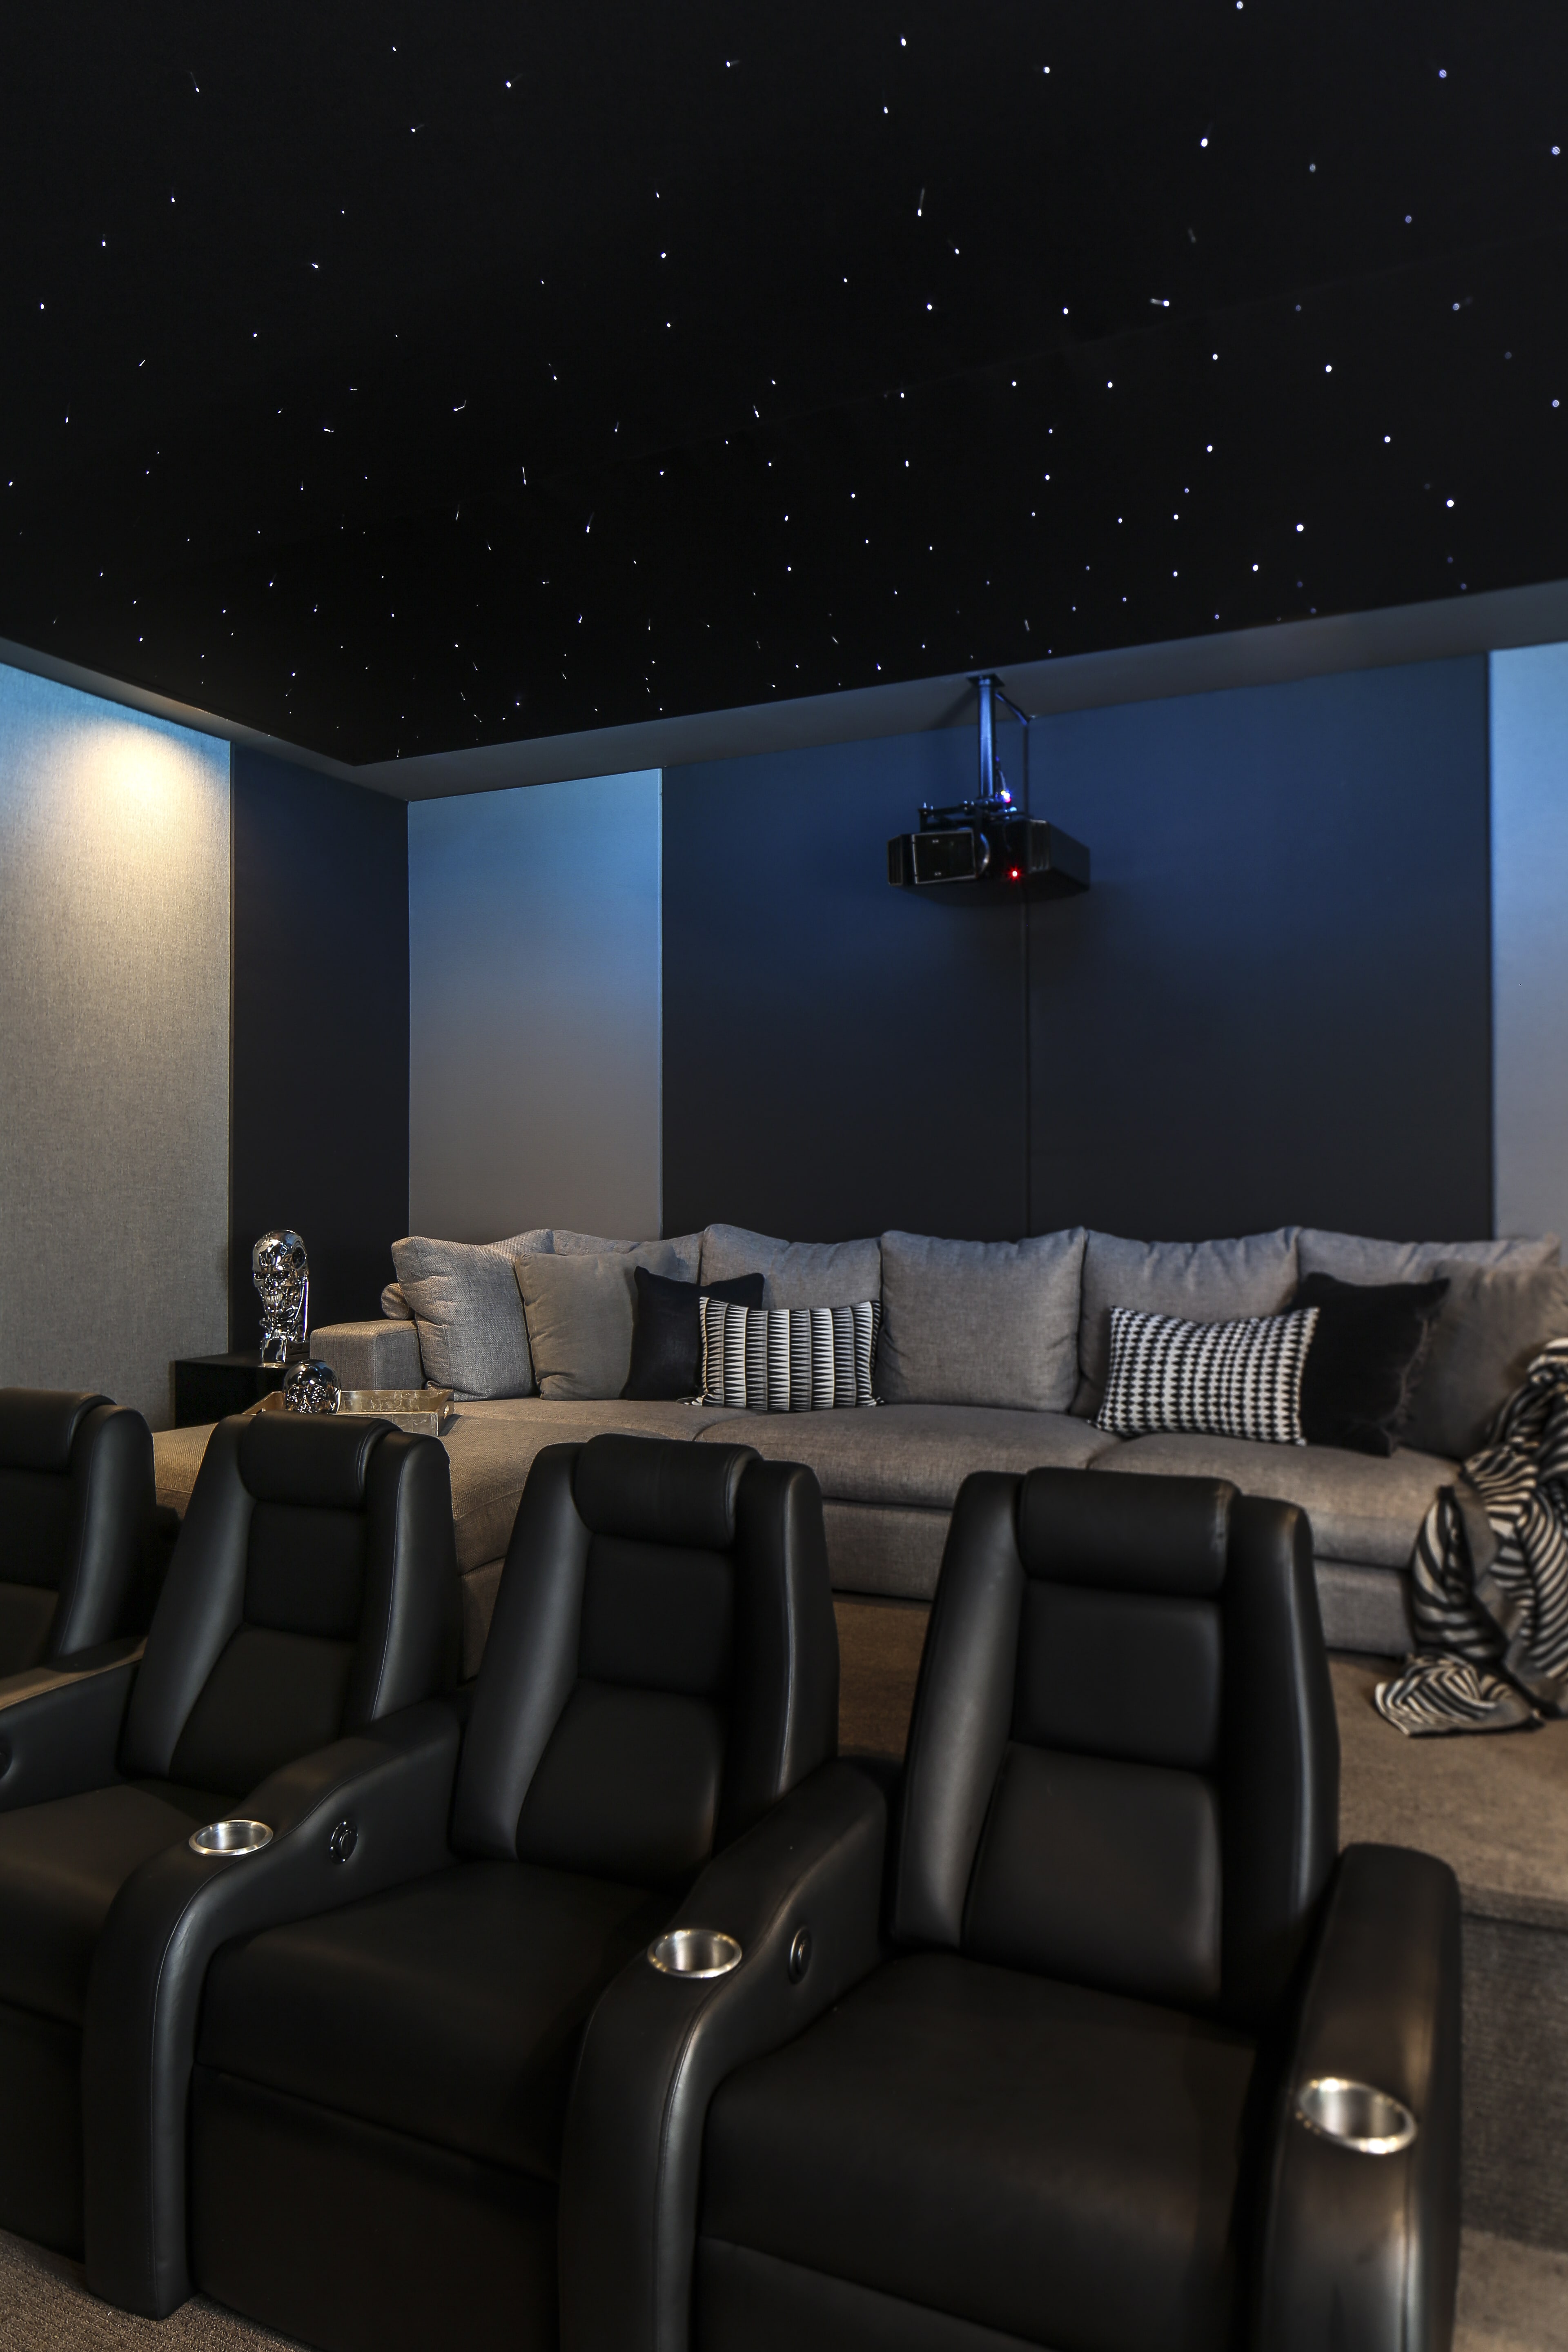 Hollywood comes home in luxe media rooms